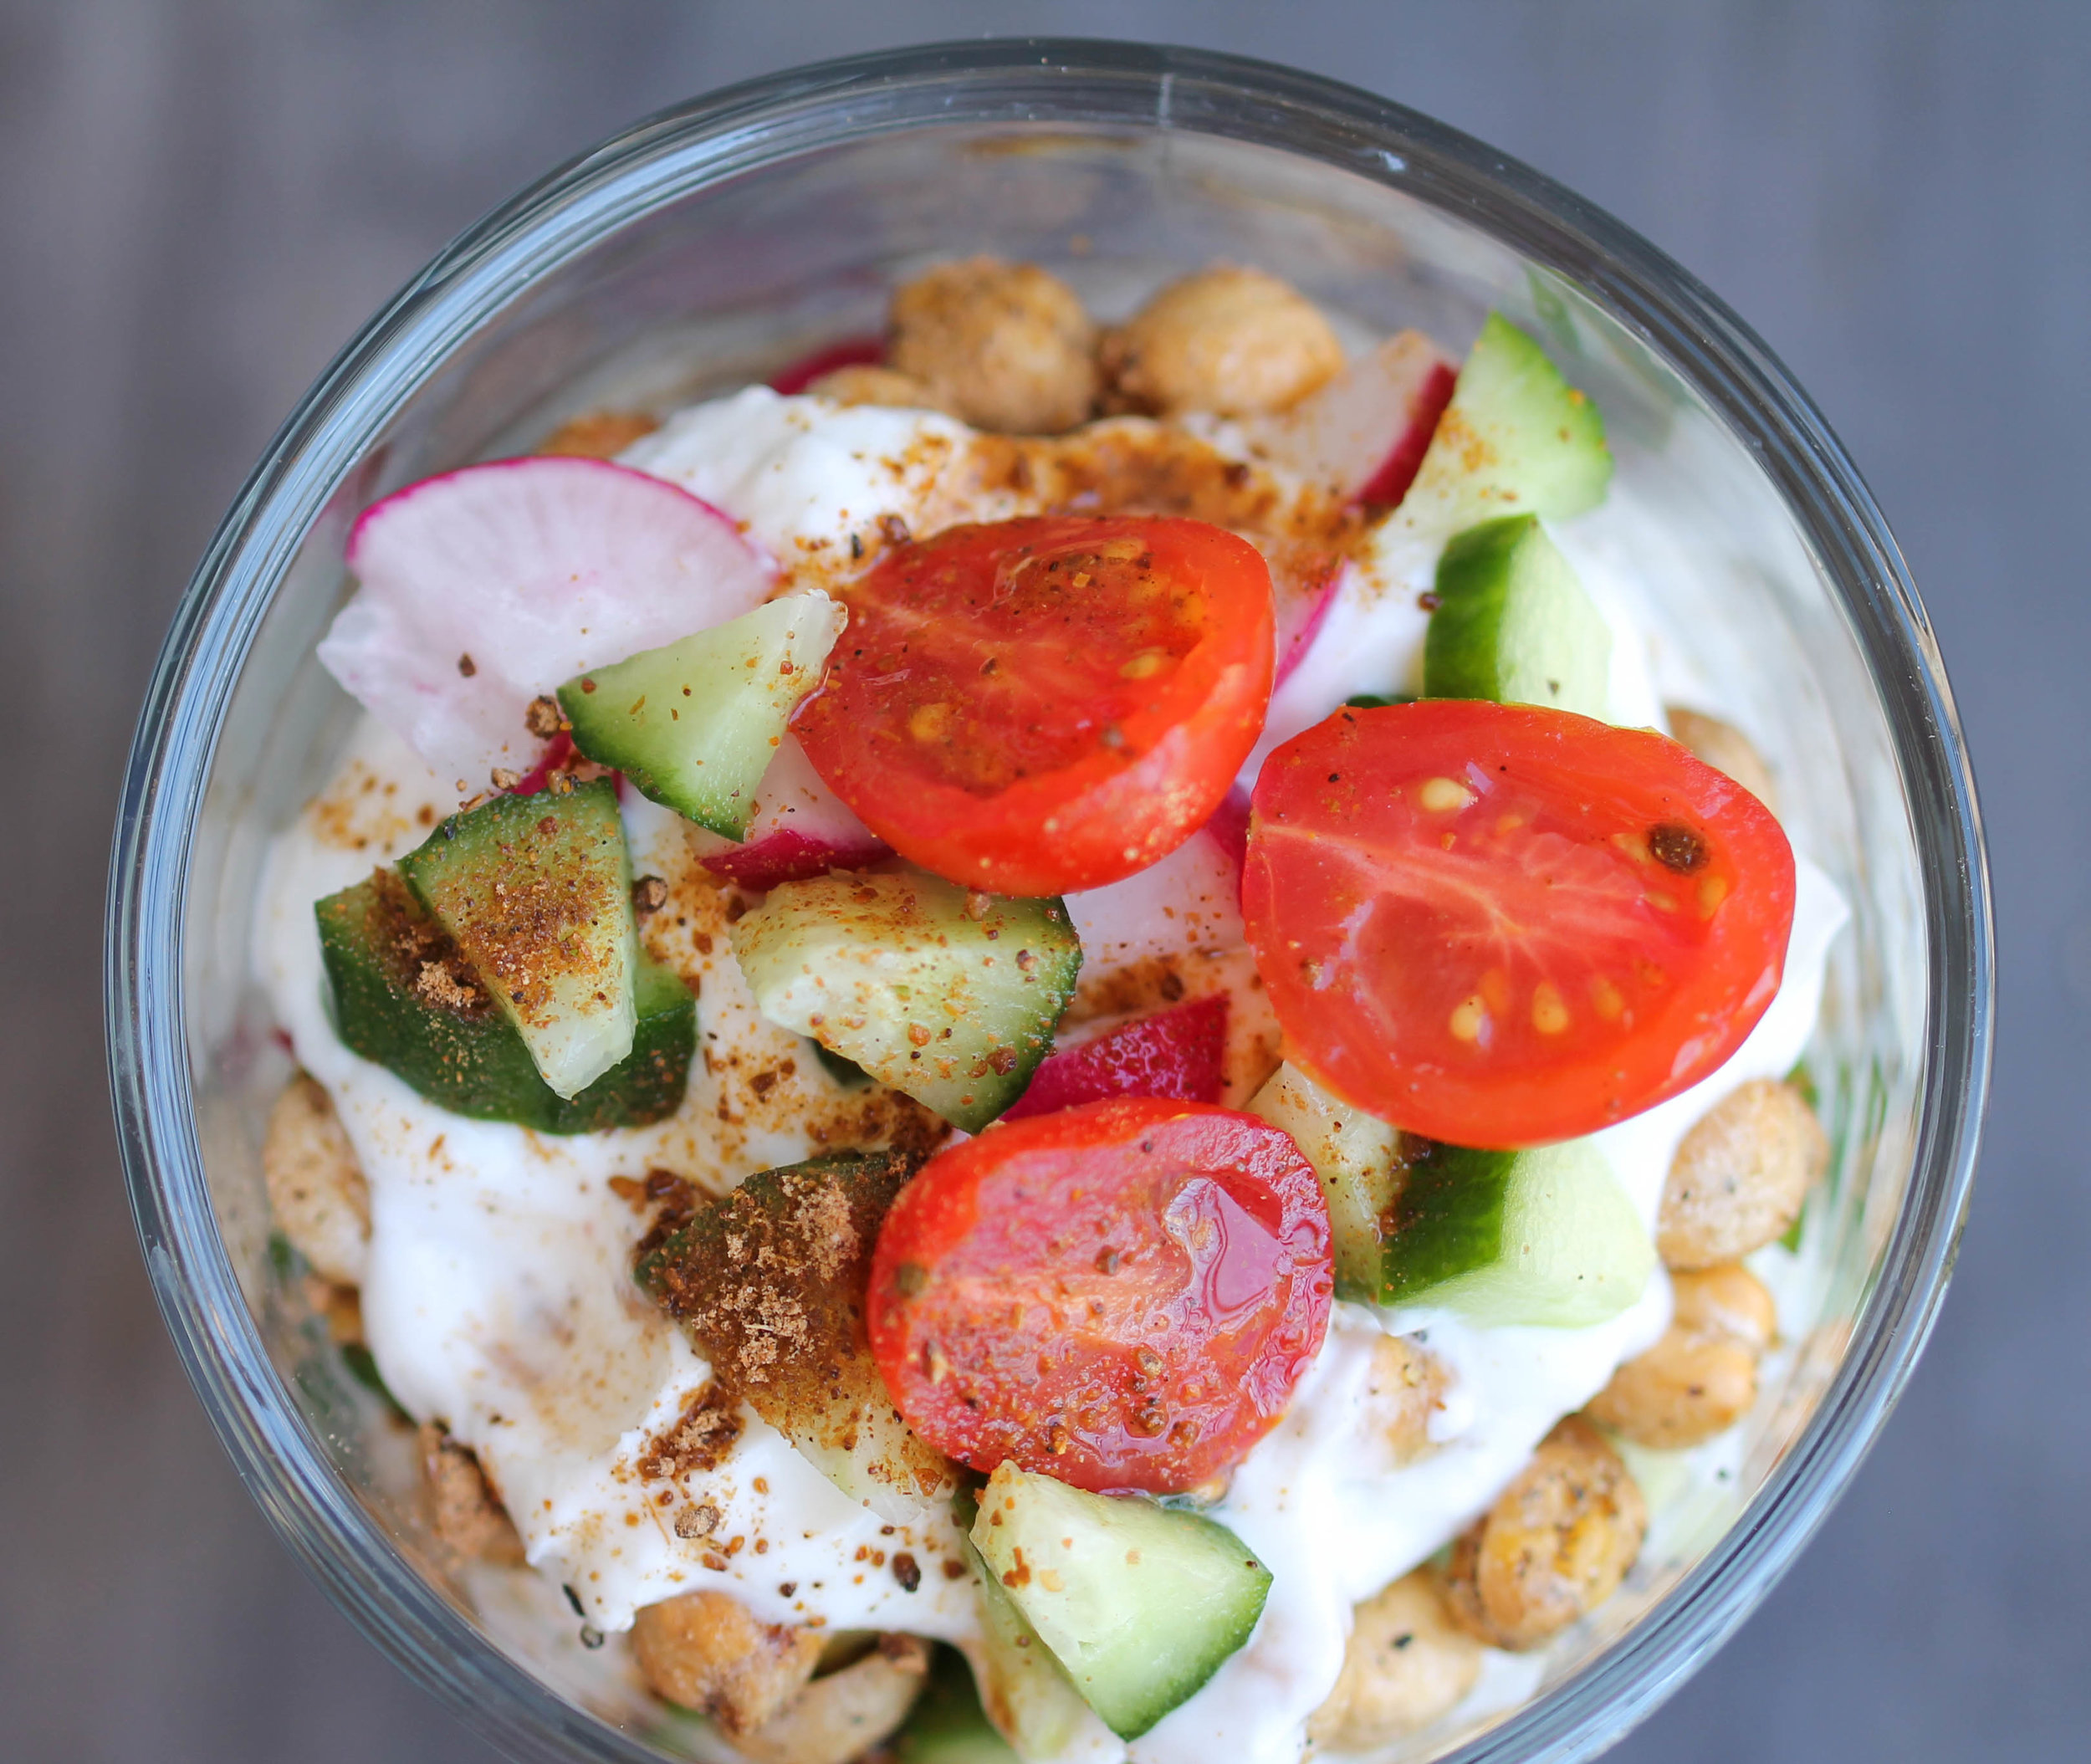 Savory Yogurt Parfait is a great option for quick, savory breakfast or an afternoon snack! It is packed with protein and other nutrients and is naturally gluten-free!